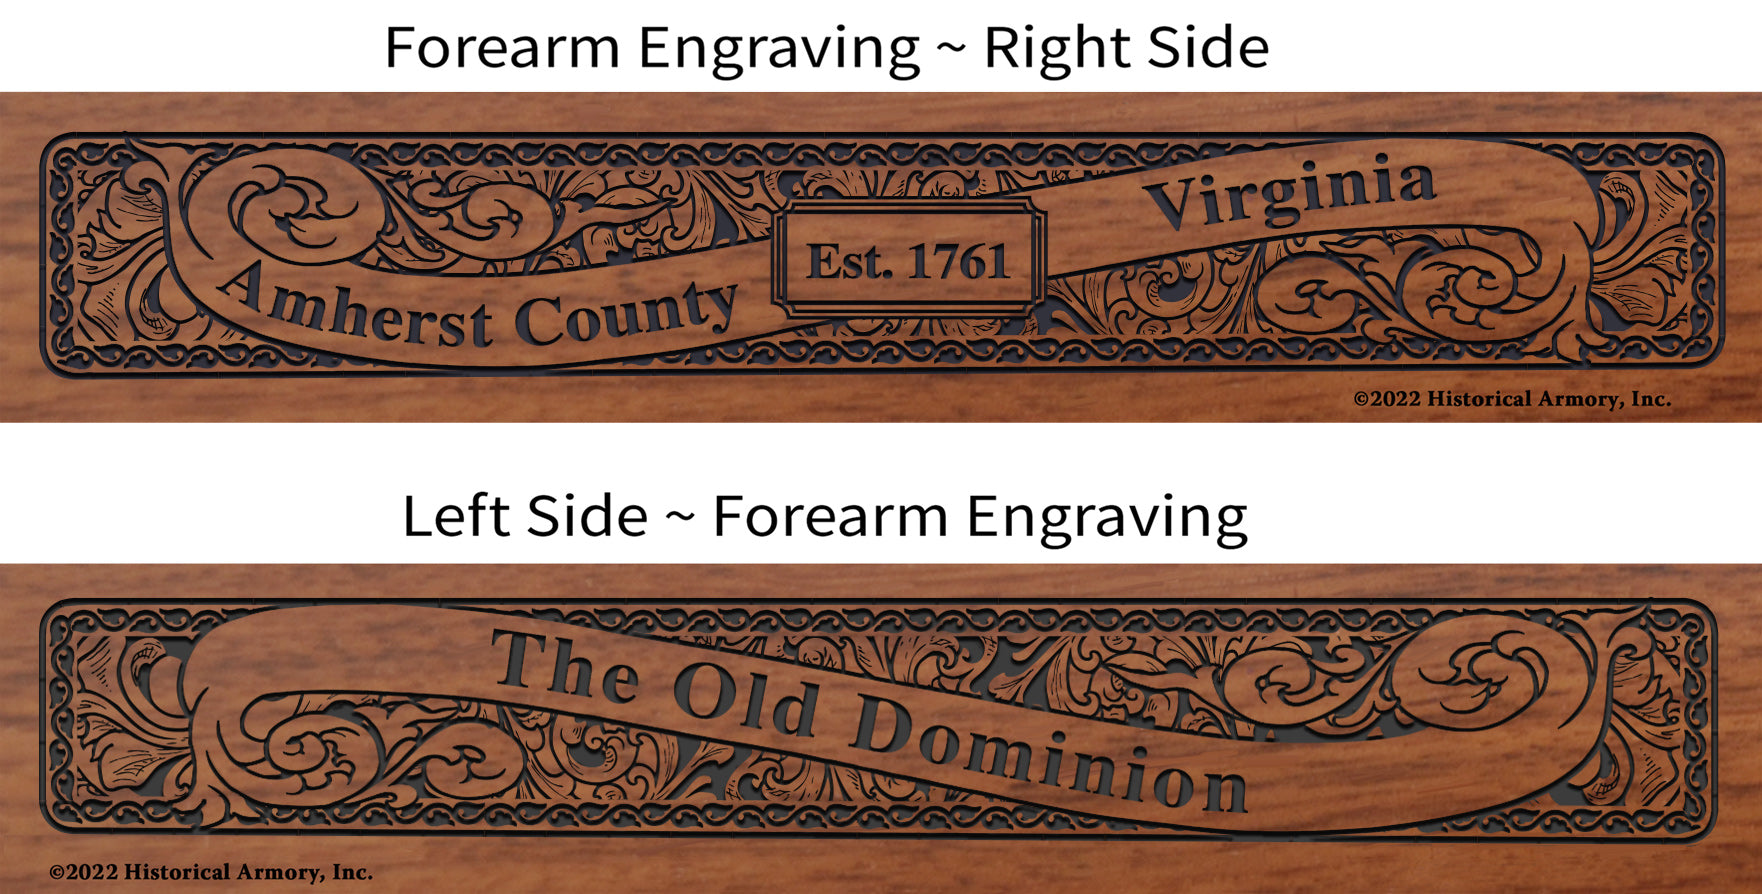 Amherst County Virginia Engraved Rifle Forearm